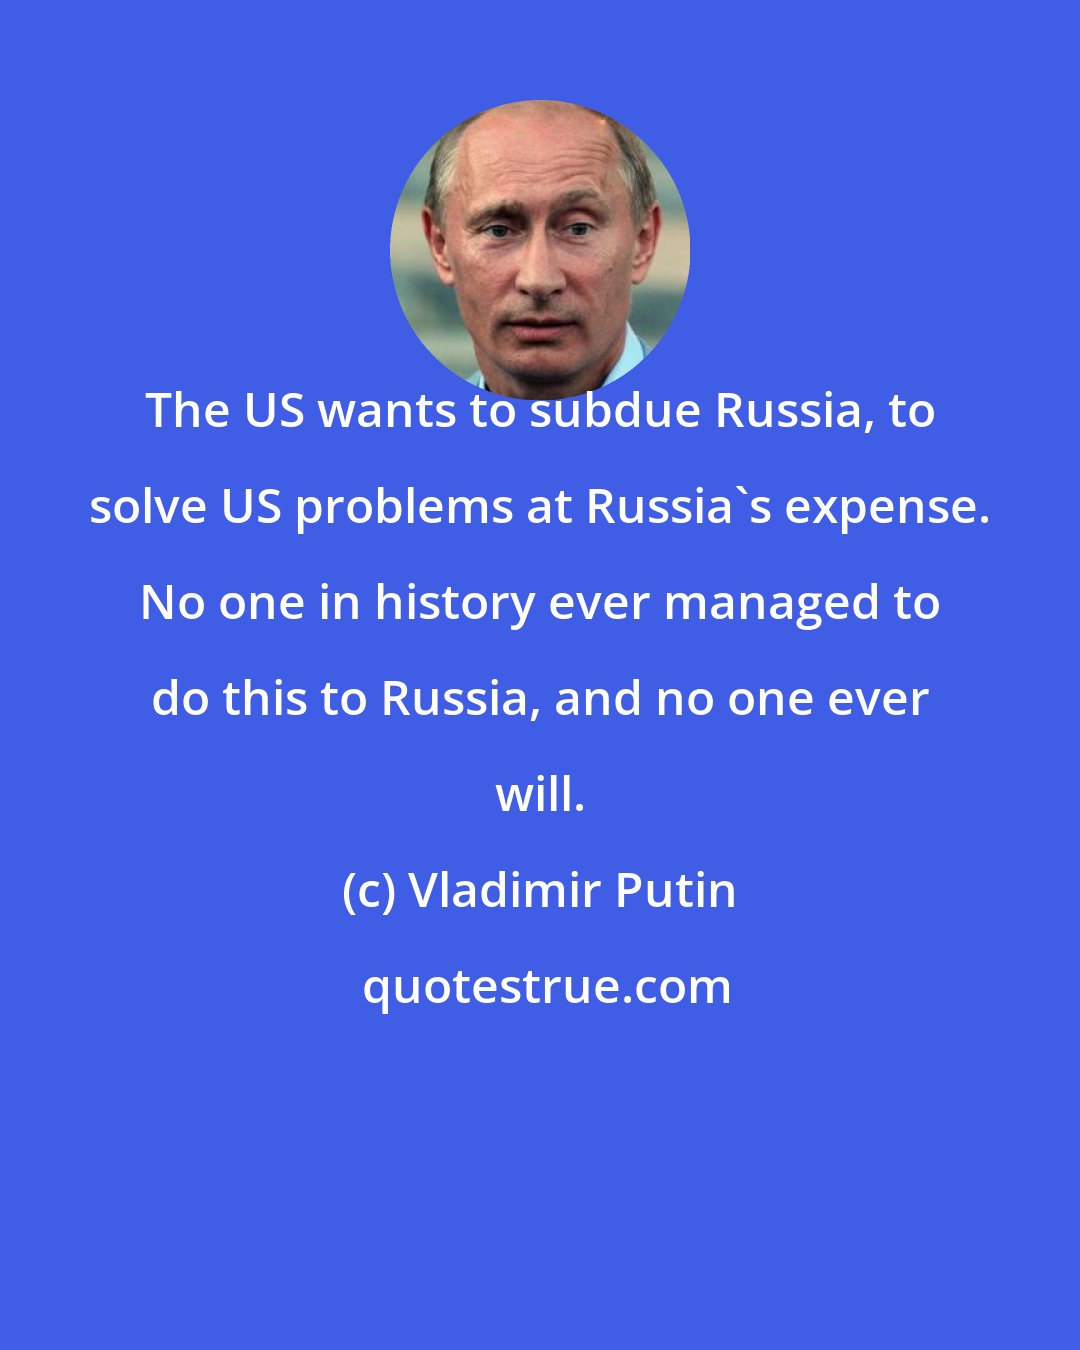 Vladimir Putin: The US wants to subdue Russia, to solve US problems at Russia's expense. No one in history ever managed to do this to Russia, and no one ever will.